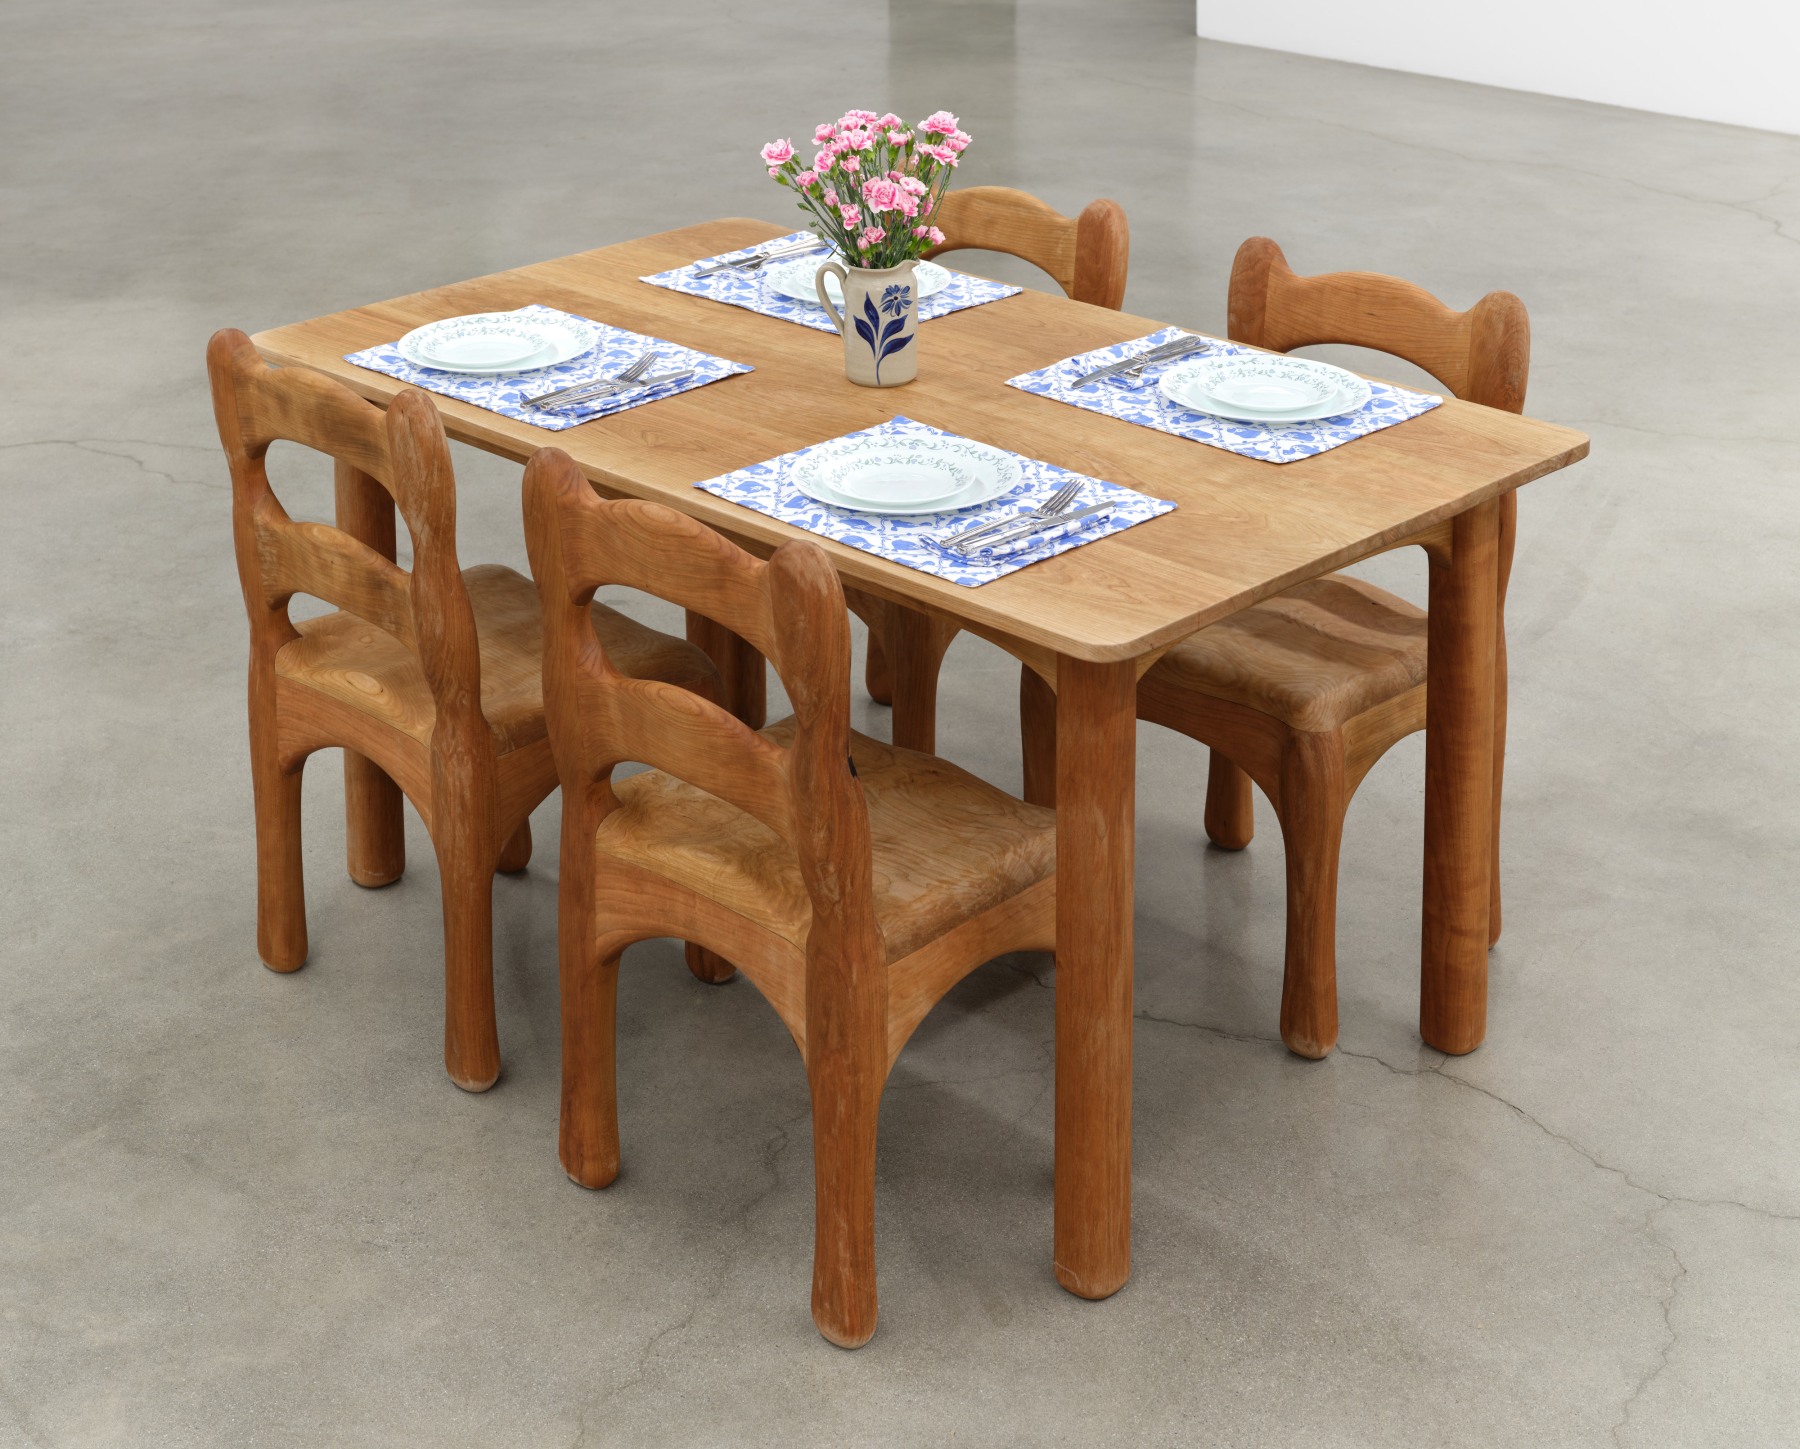 Bambou Gili's artwork "Those Black-Eyed Peas They Tasted Alright to Me, Earl". Four chairs around a set table. 60 x 36 x 30 in (152.4 x 91.4 x 76.2 cm), cherry wood, found objects, 2023.